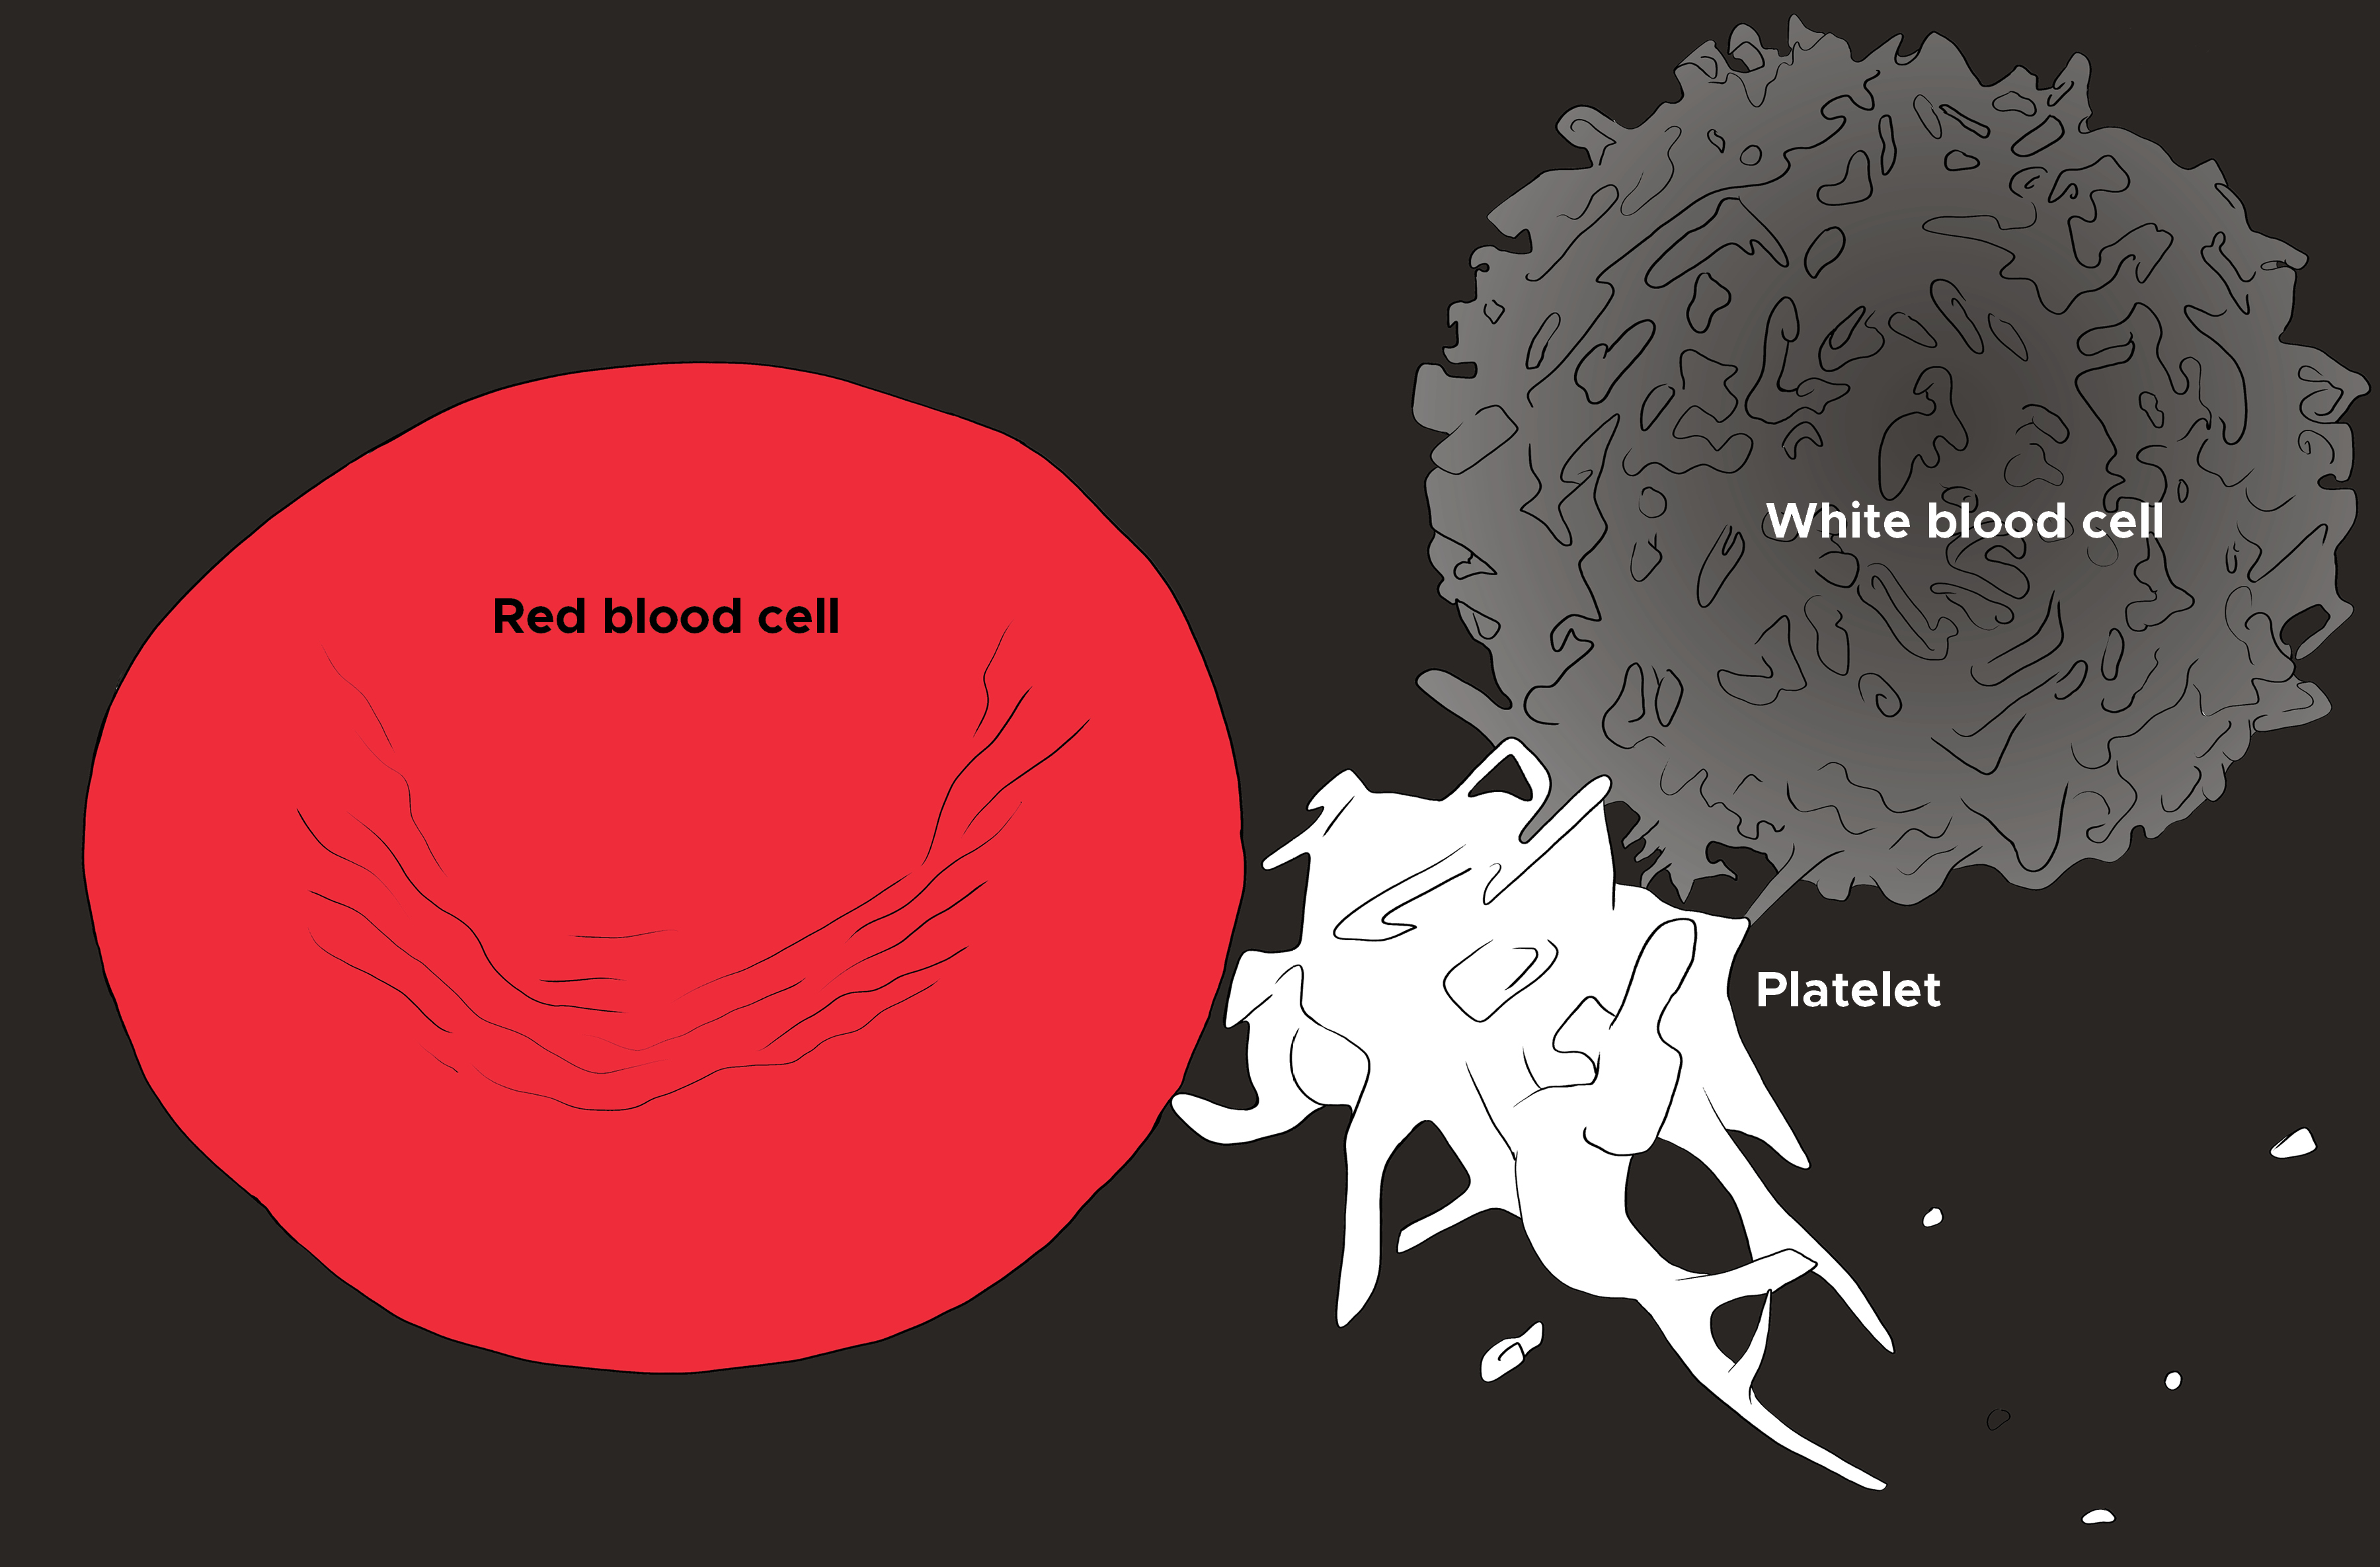 Illustration of red blood cell, platelet, and white blood cell